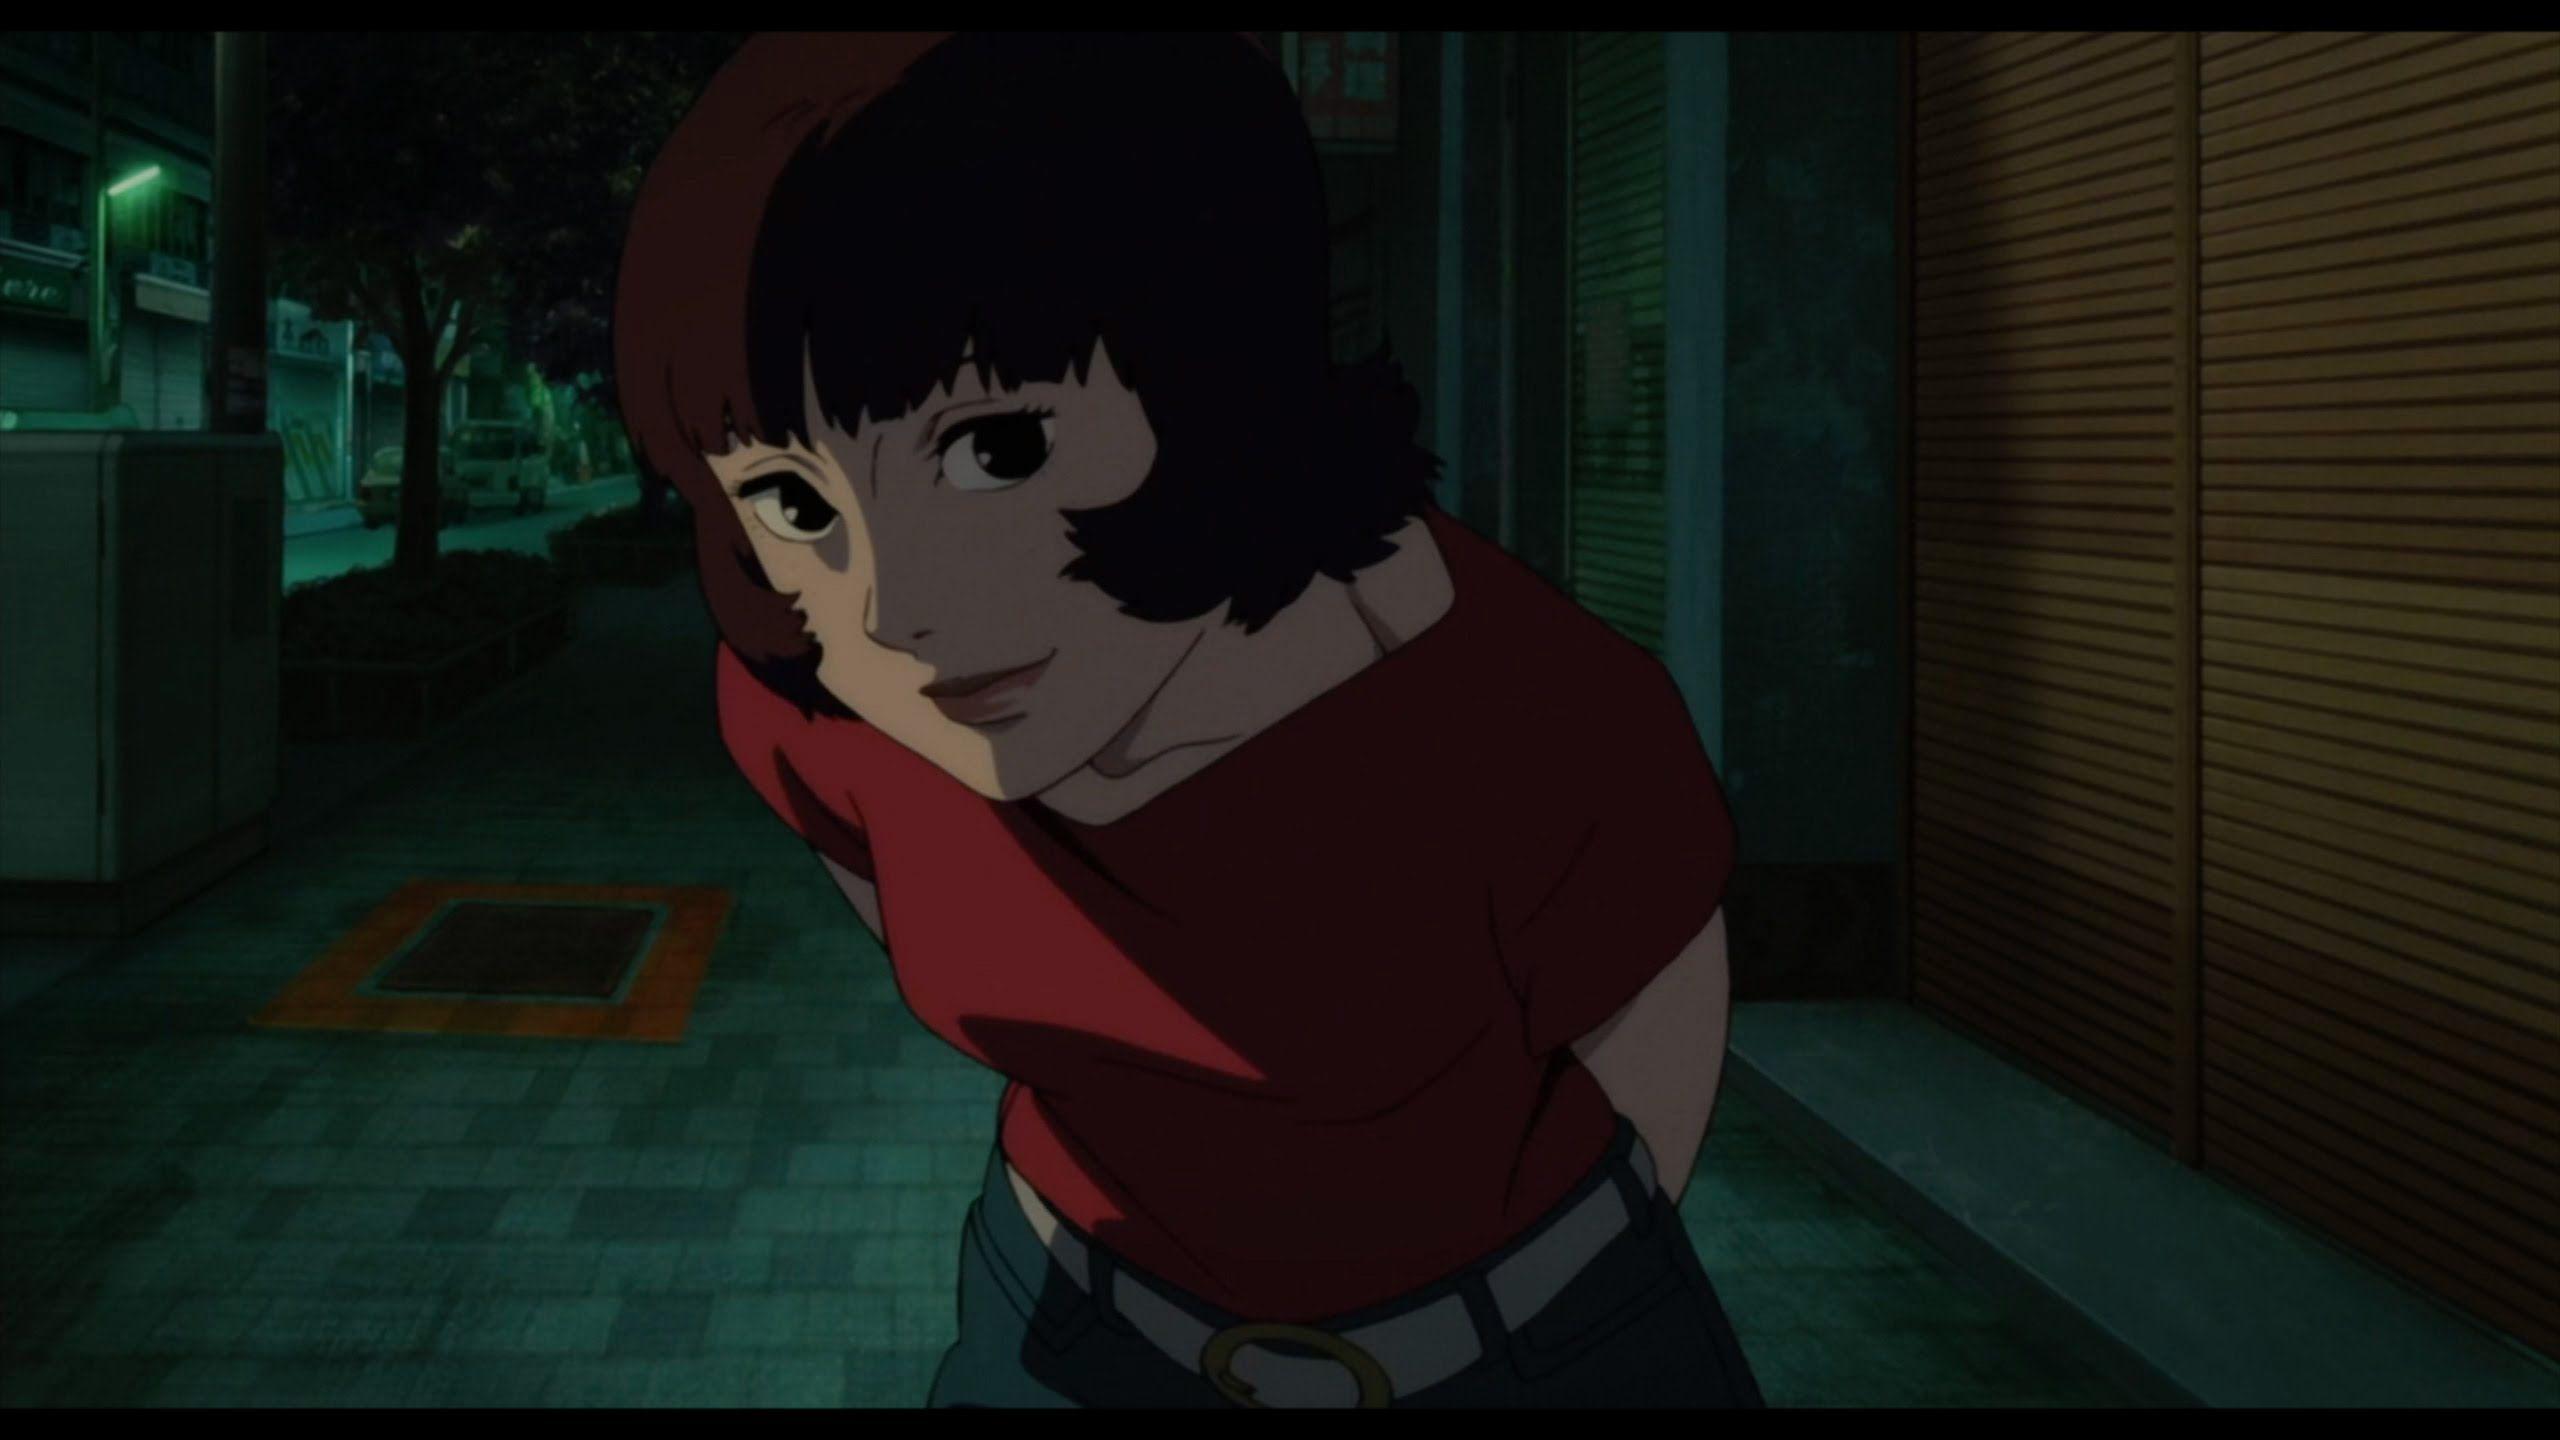 And now I must watch Paranoia Agent, Perfect Blue & Paprika